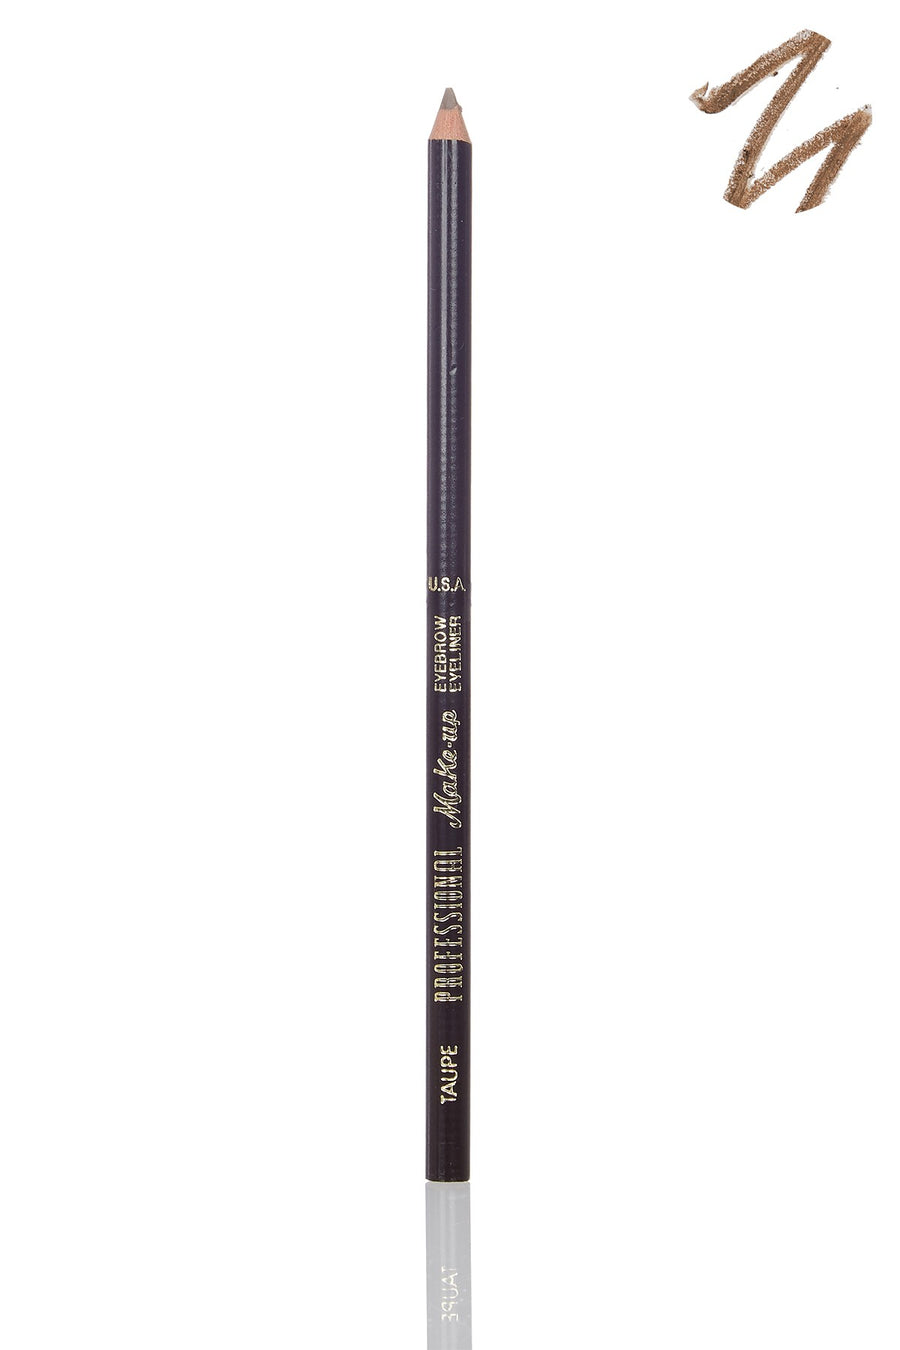 Professional Eyebrow Eyeliner Pencil - Taupe - Blend Mineral Cosmetics